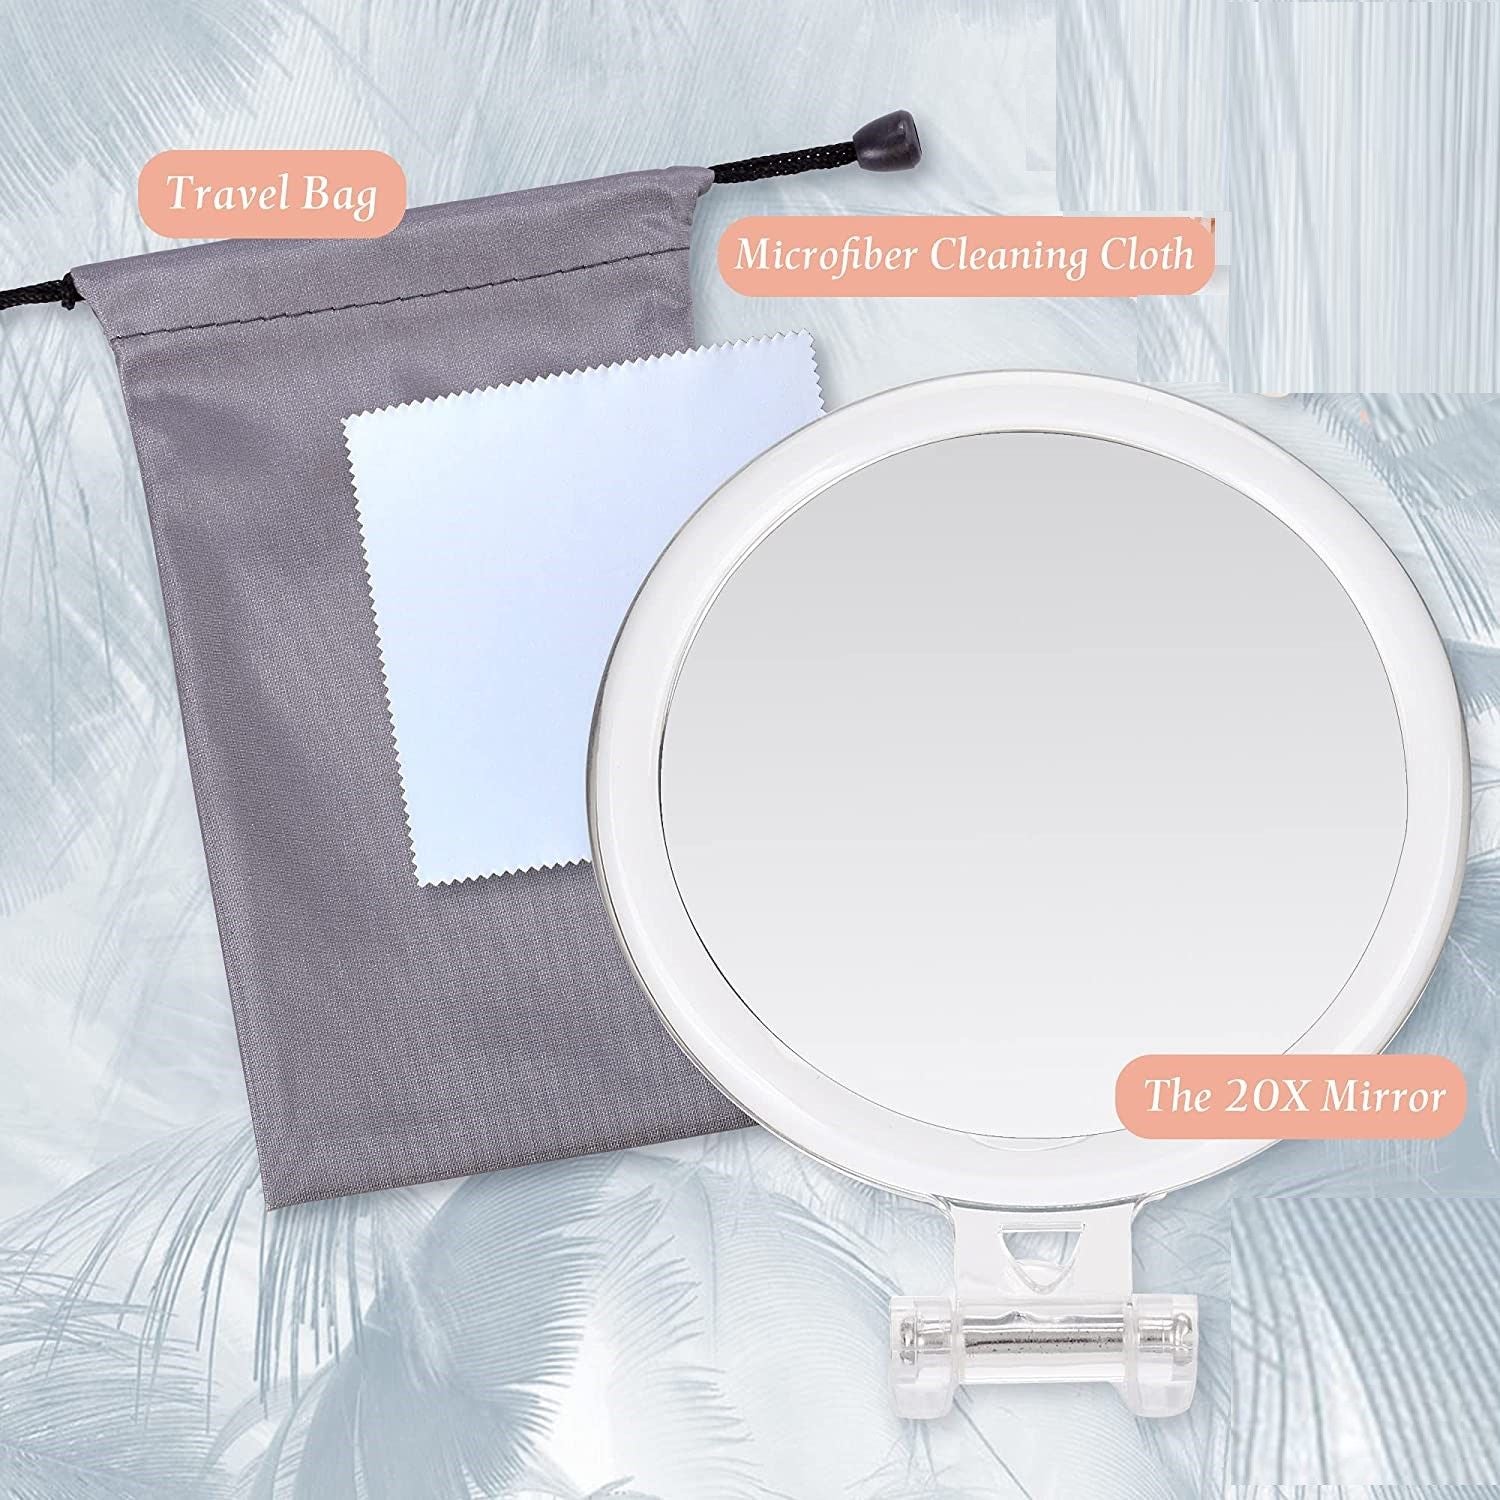 20X Magnifying Hand Mirror Two Sided Use for Makeup Application, Tweezing, and Blackhead/Blemish Removal (15 cm) - image2